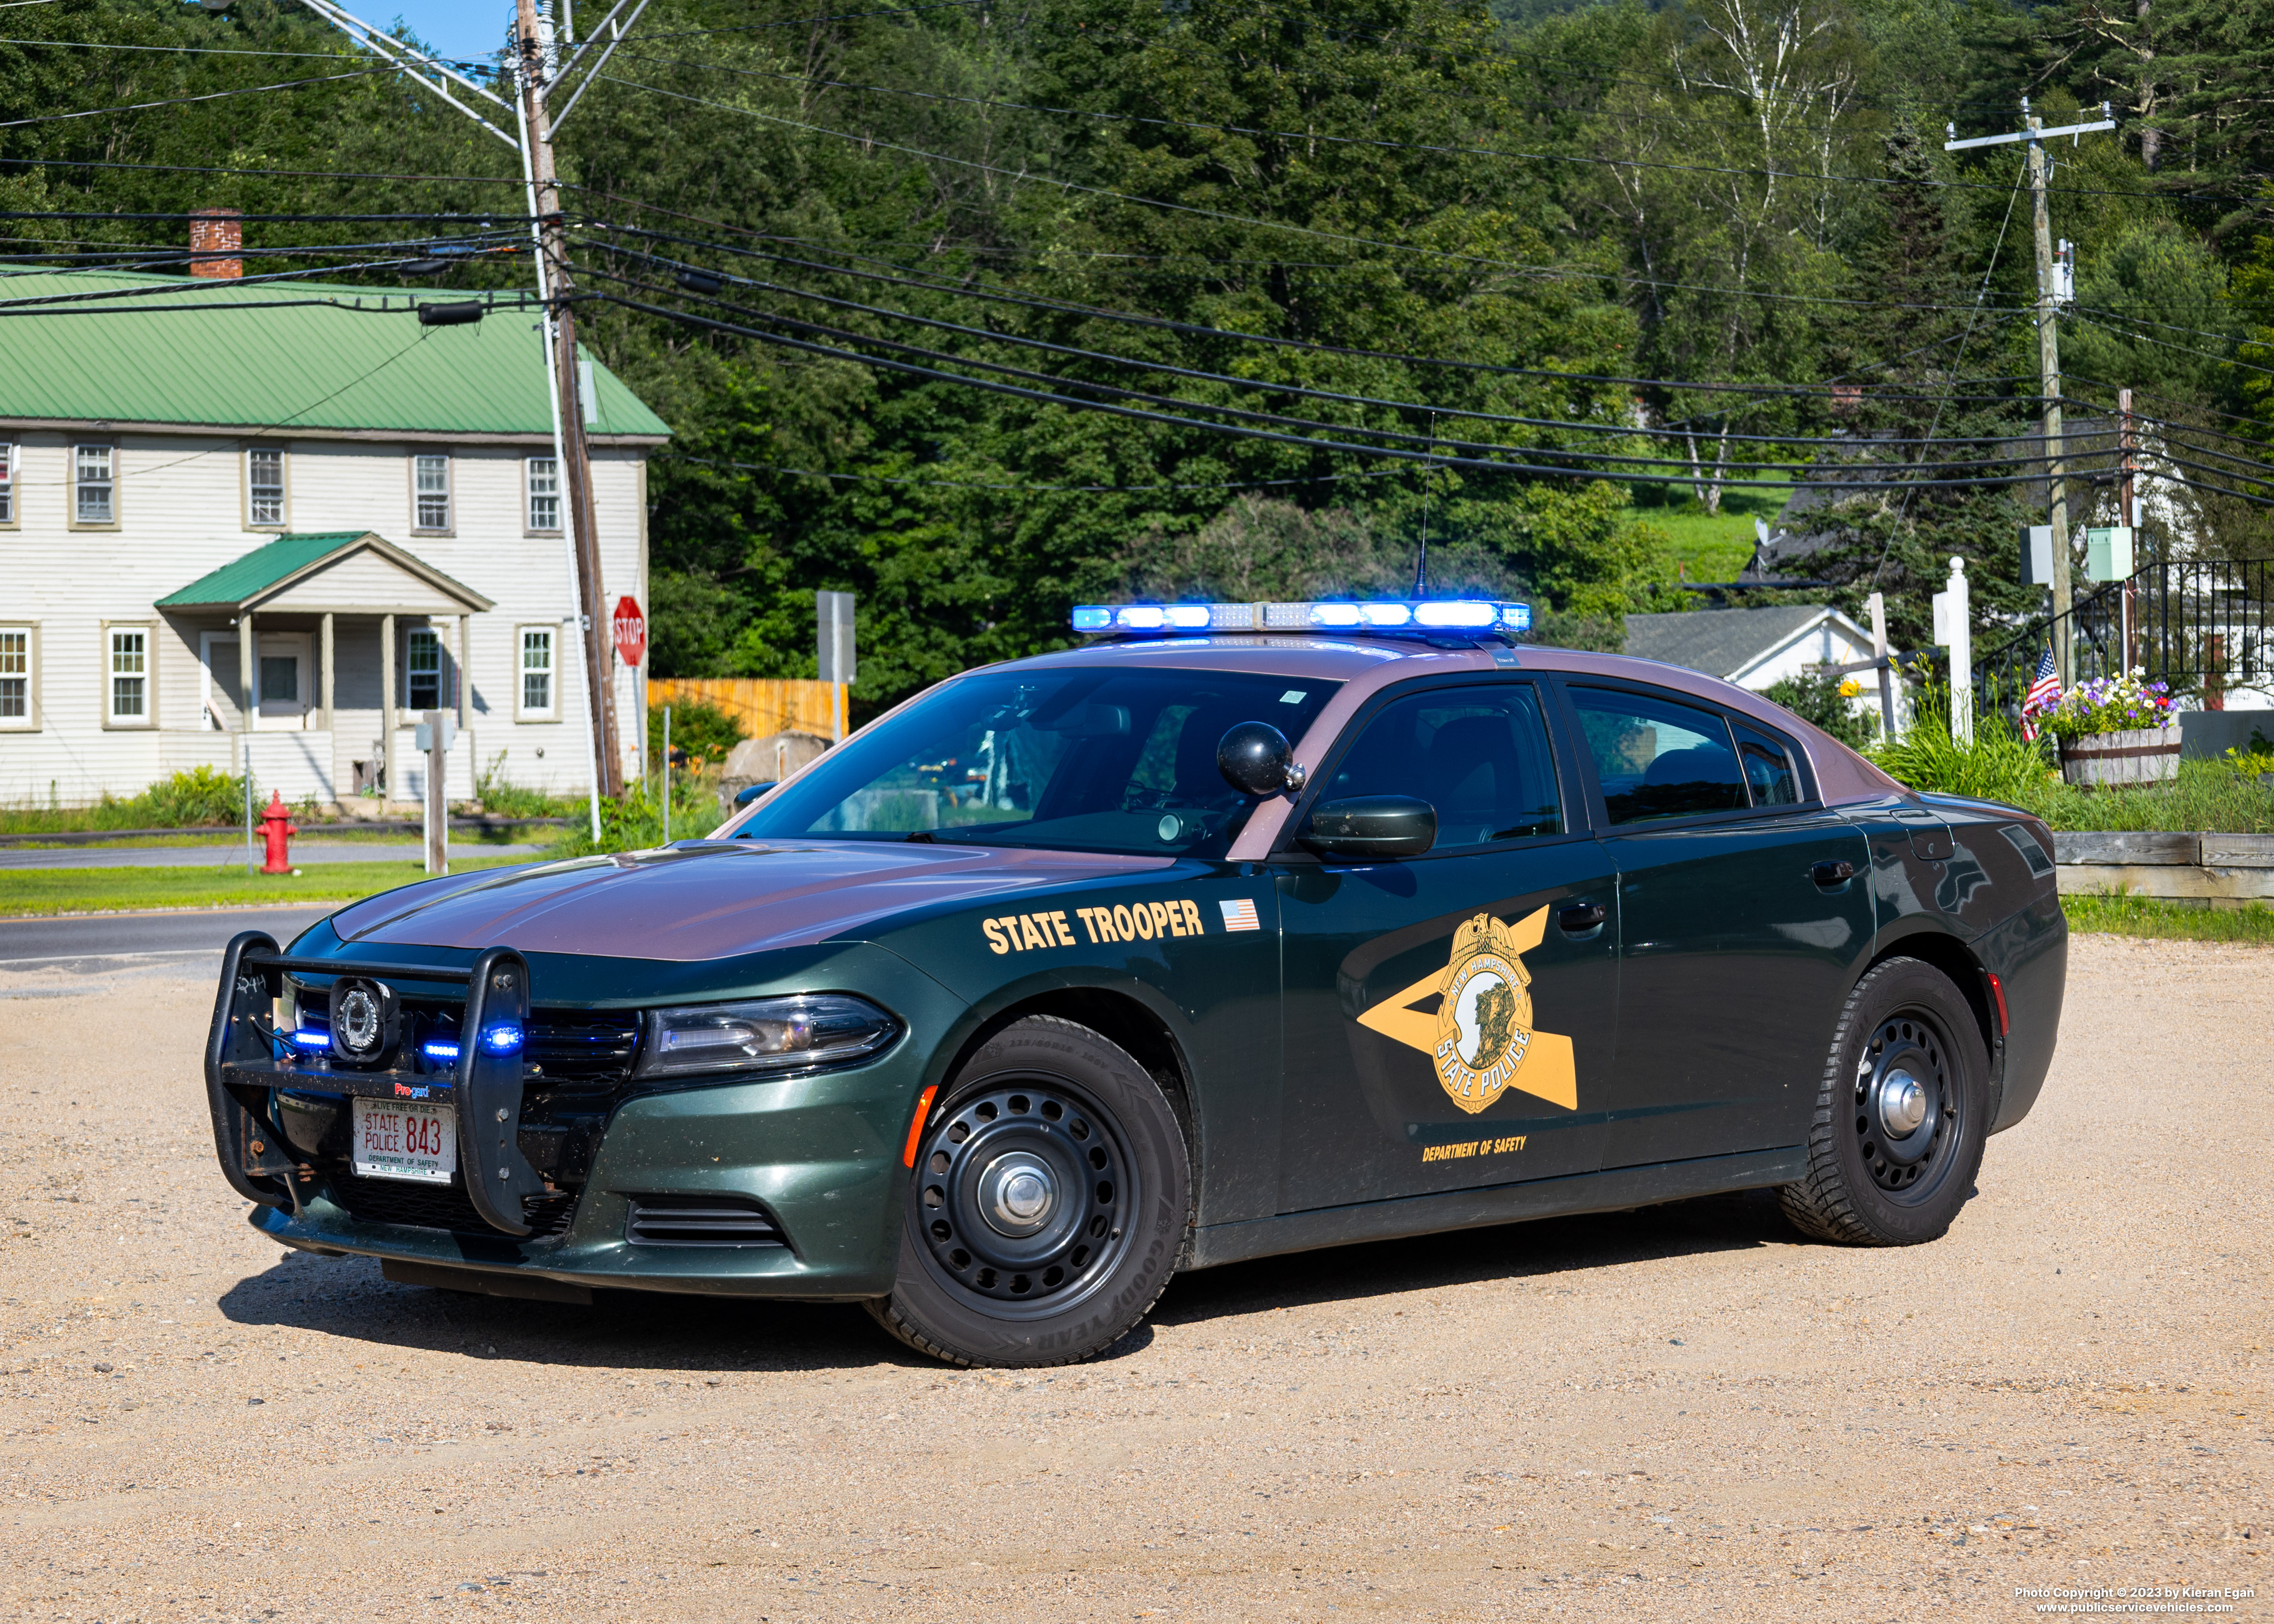 A photo  of New Hampshire State Police
            Cruiser 843, a 2017 Dodge Charger             taken by Kieran Egan